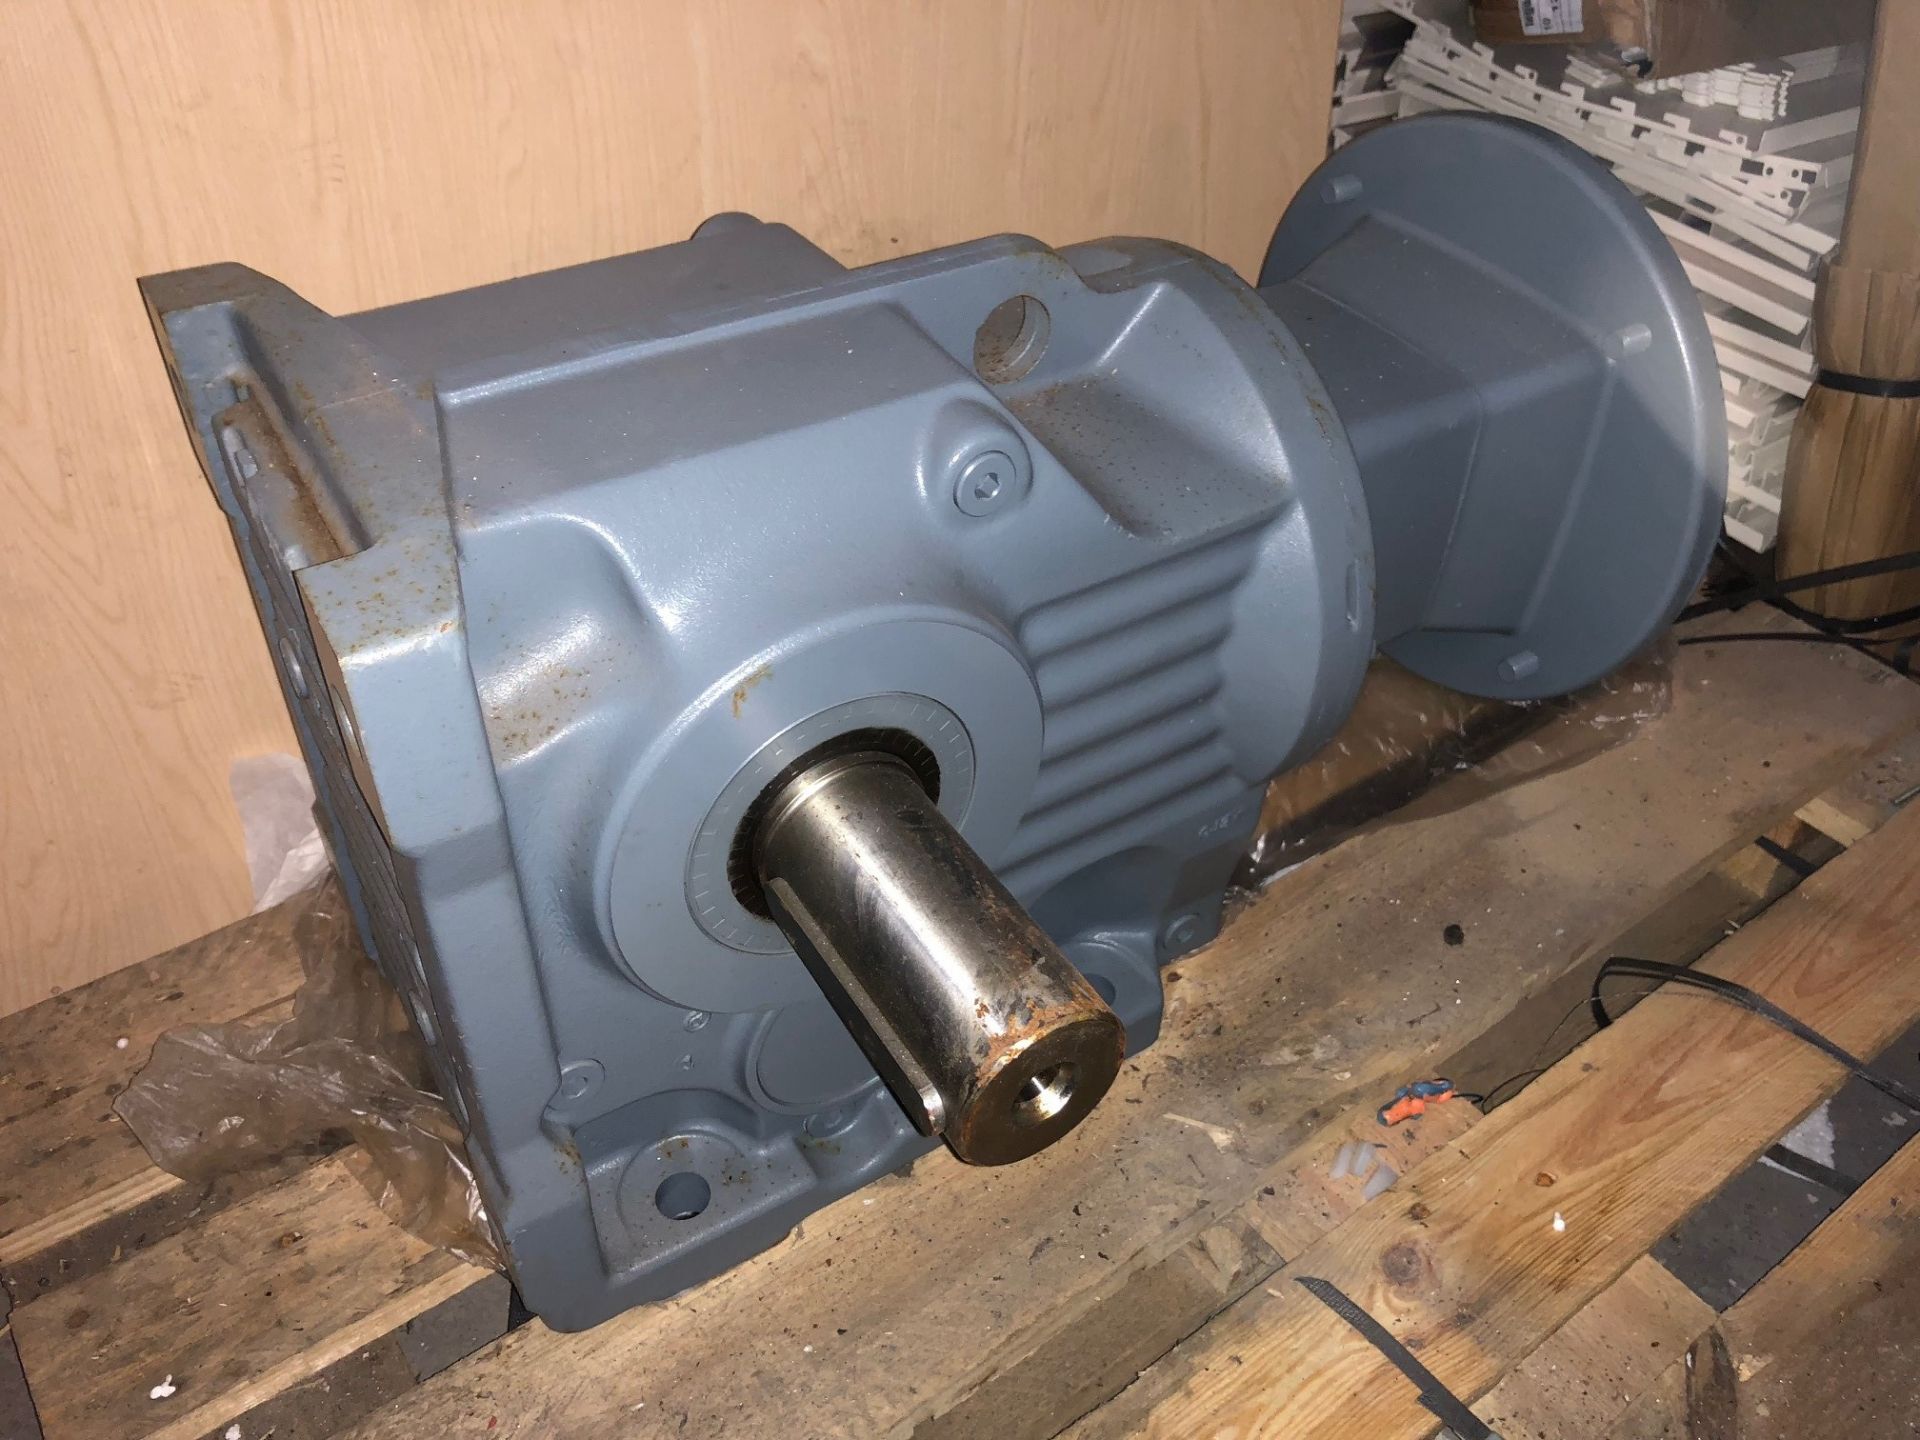 1 x S.E.W K97 Helical-bevel gear unit complete with adapter. Input speed 1400 rpm. Output speed 74